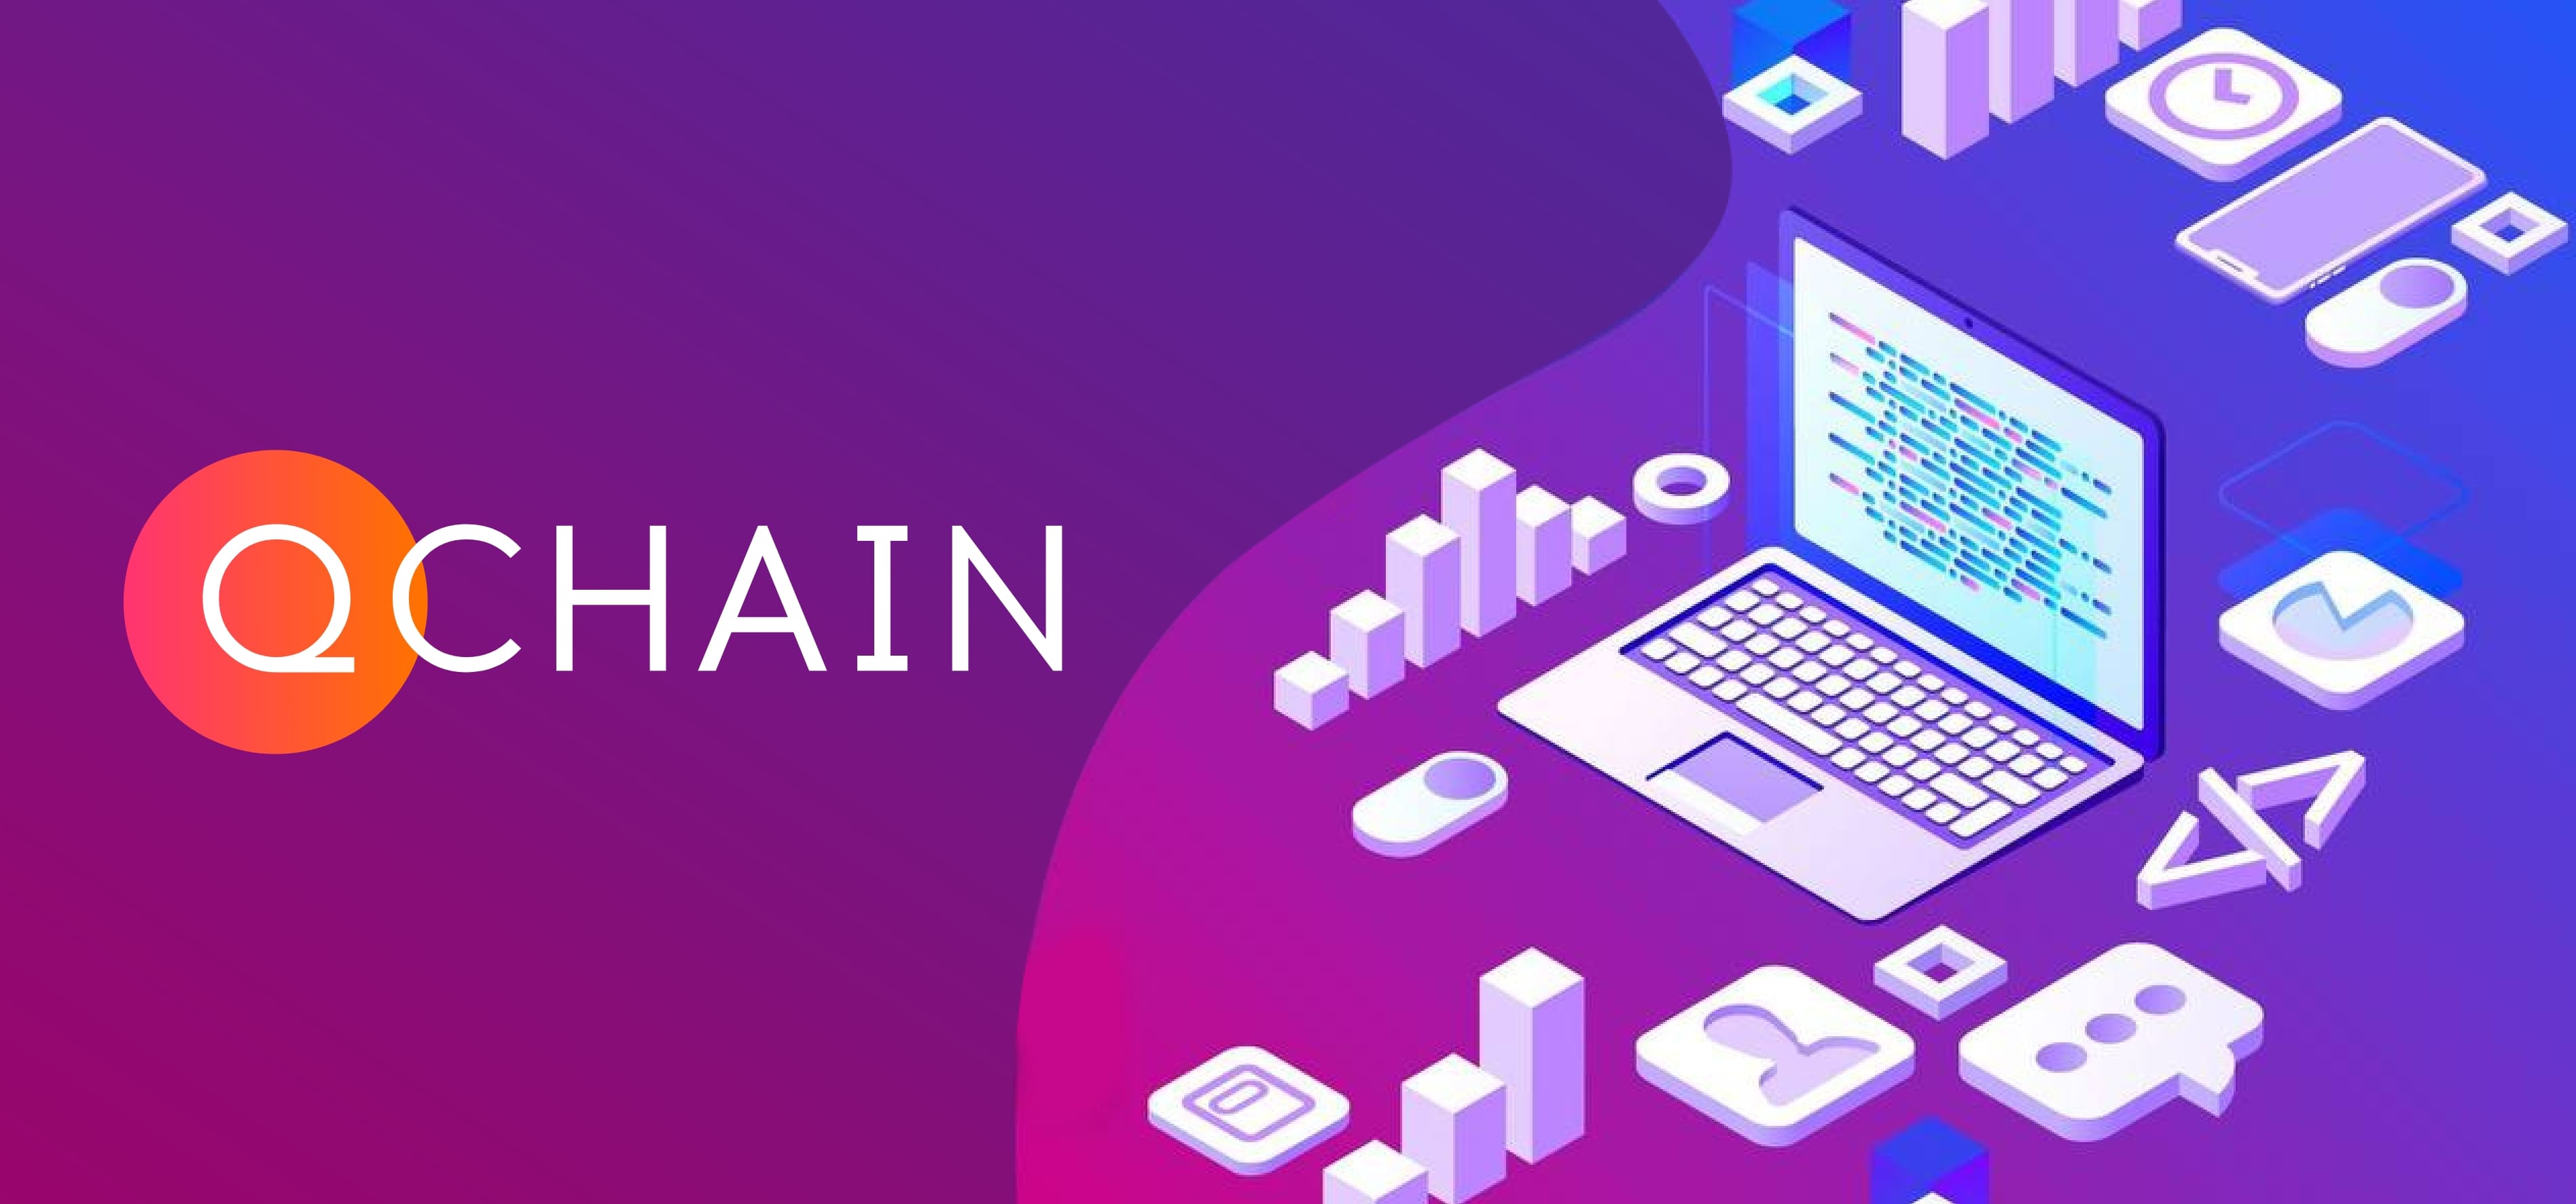 Qchain in the media